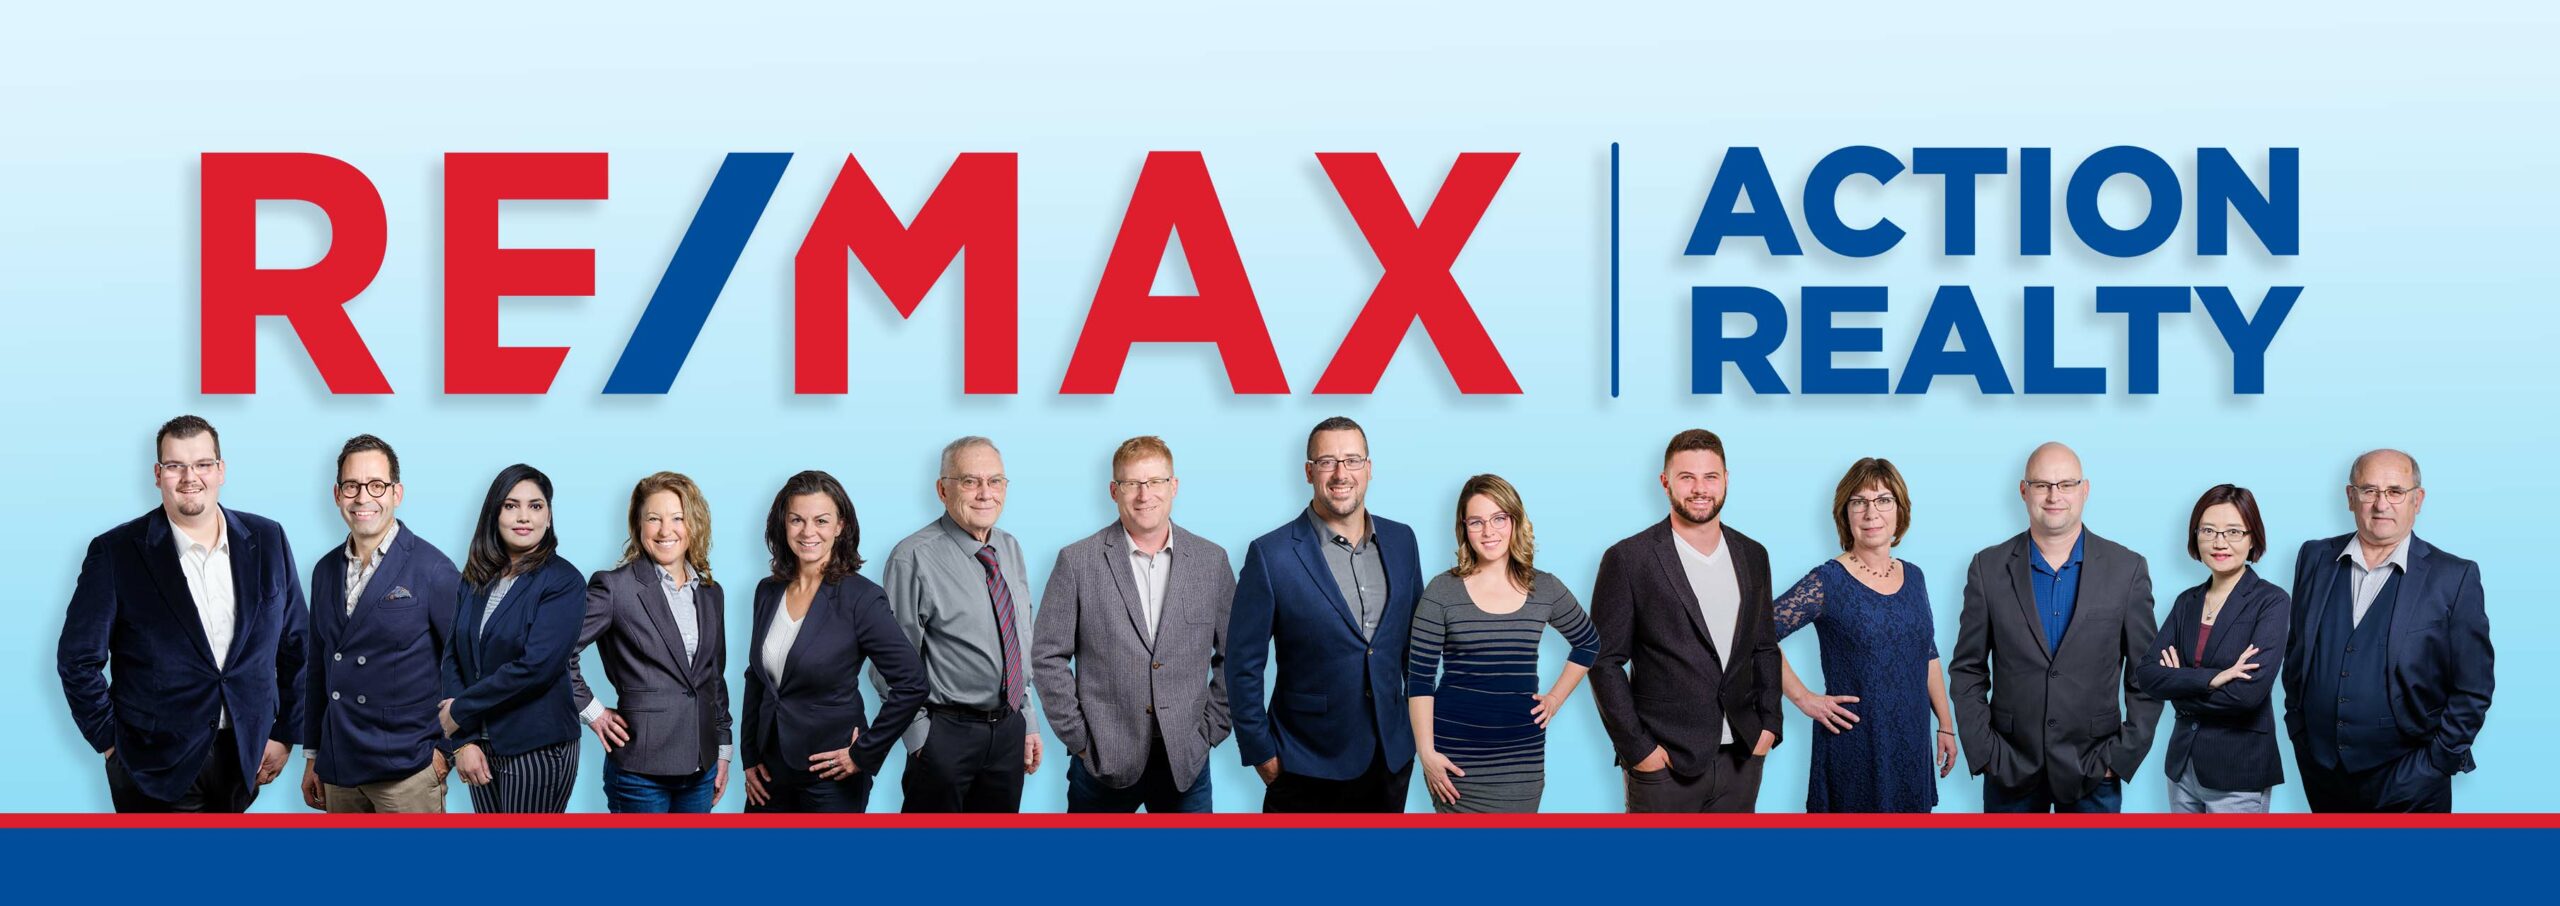 RE/MAX Action Realty Team